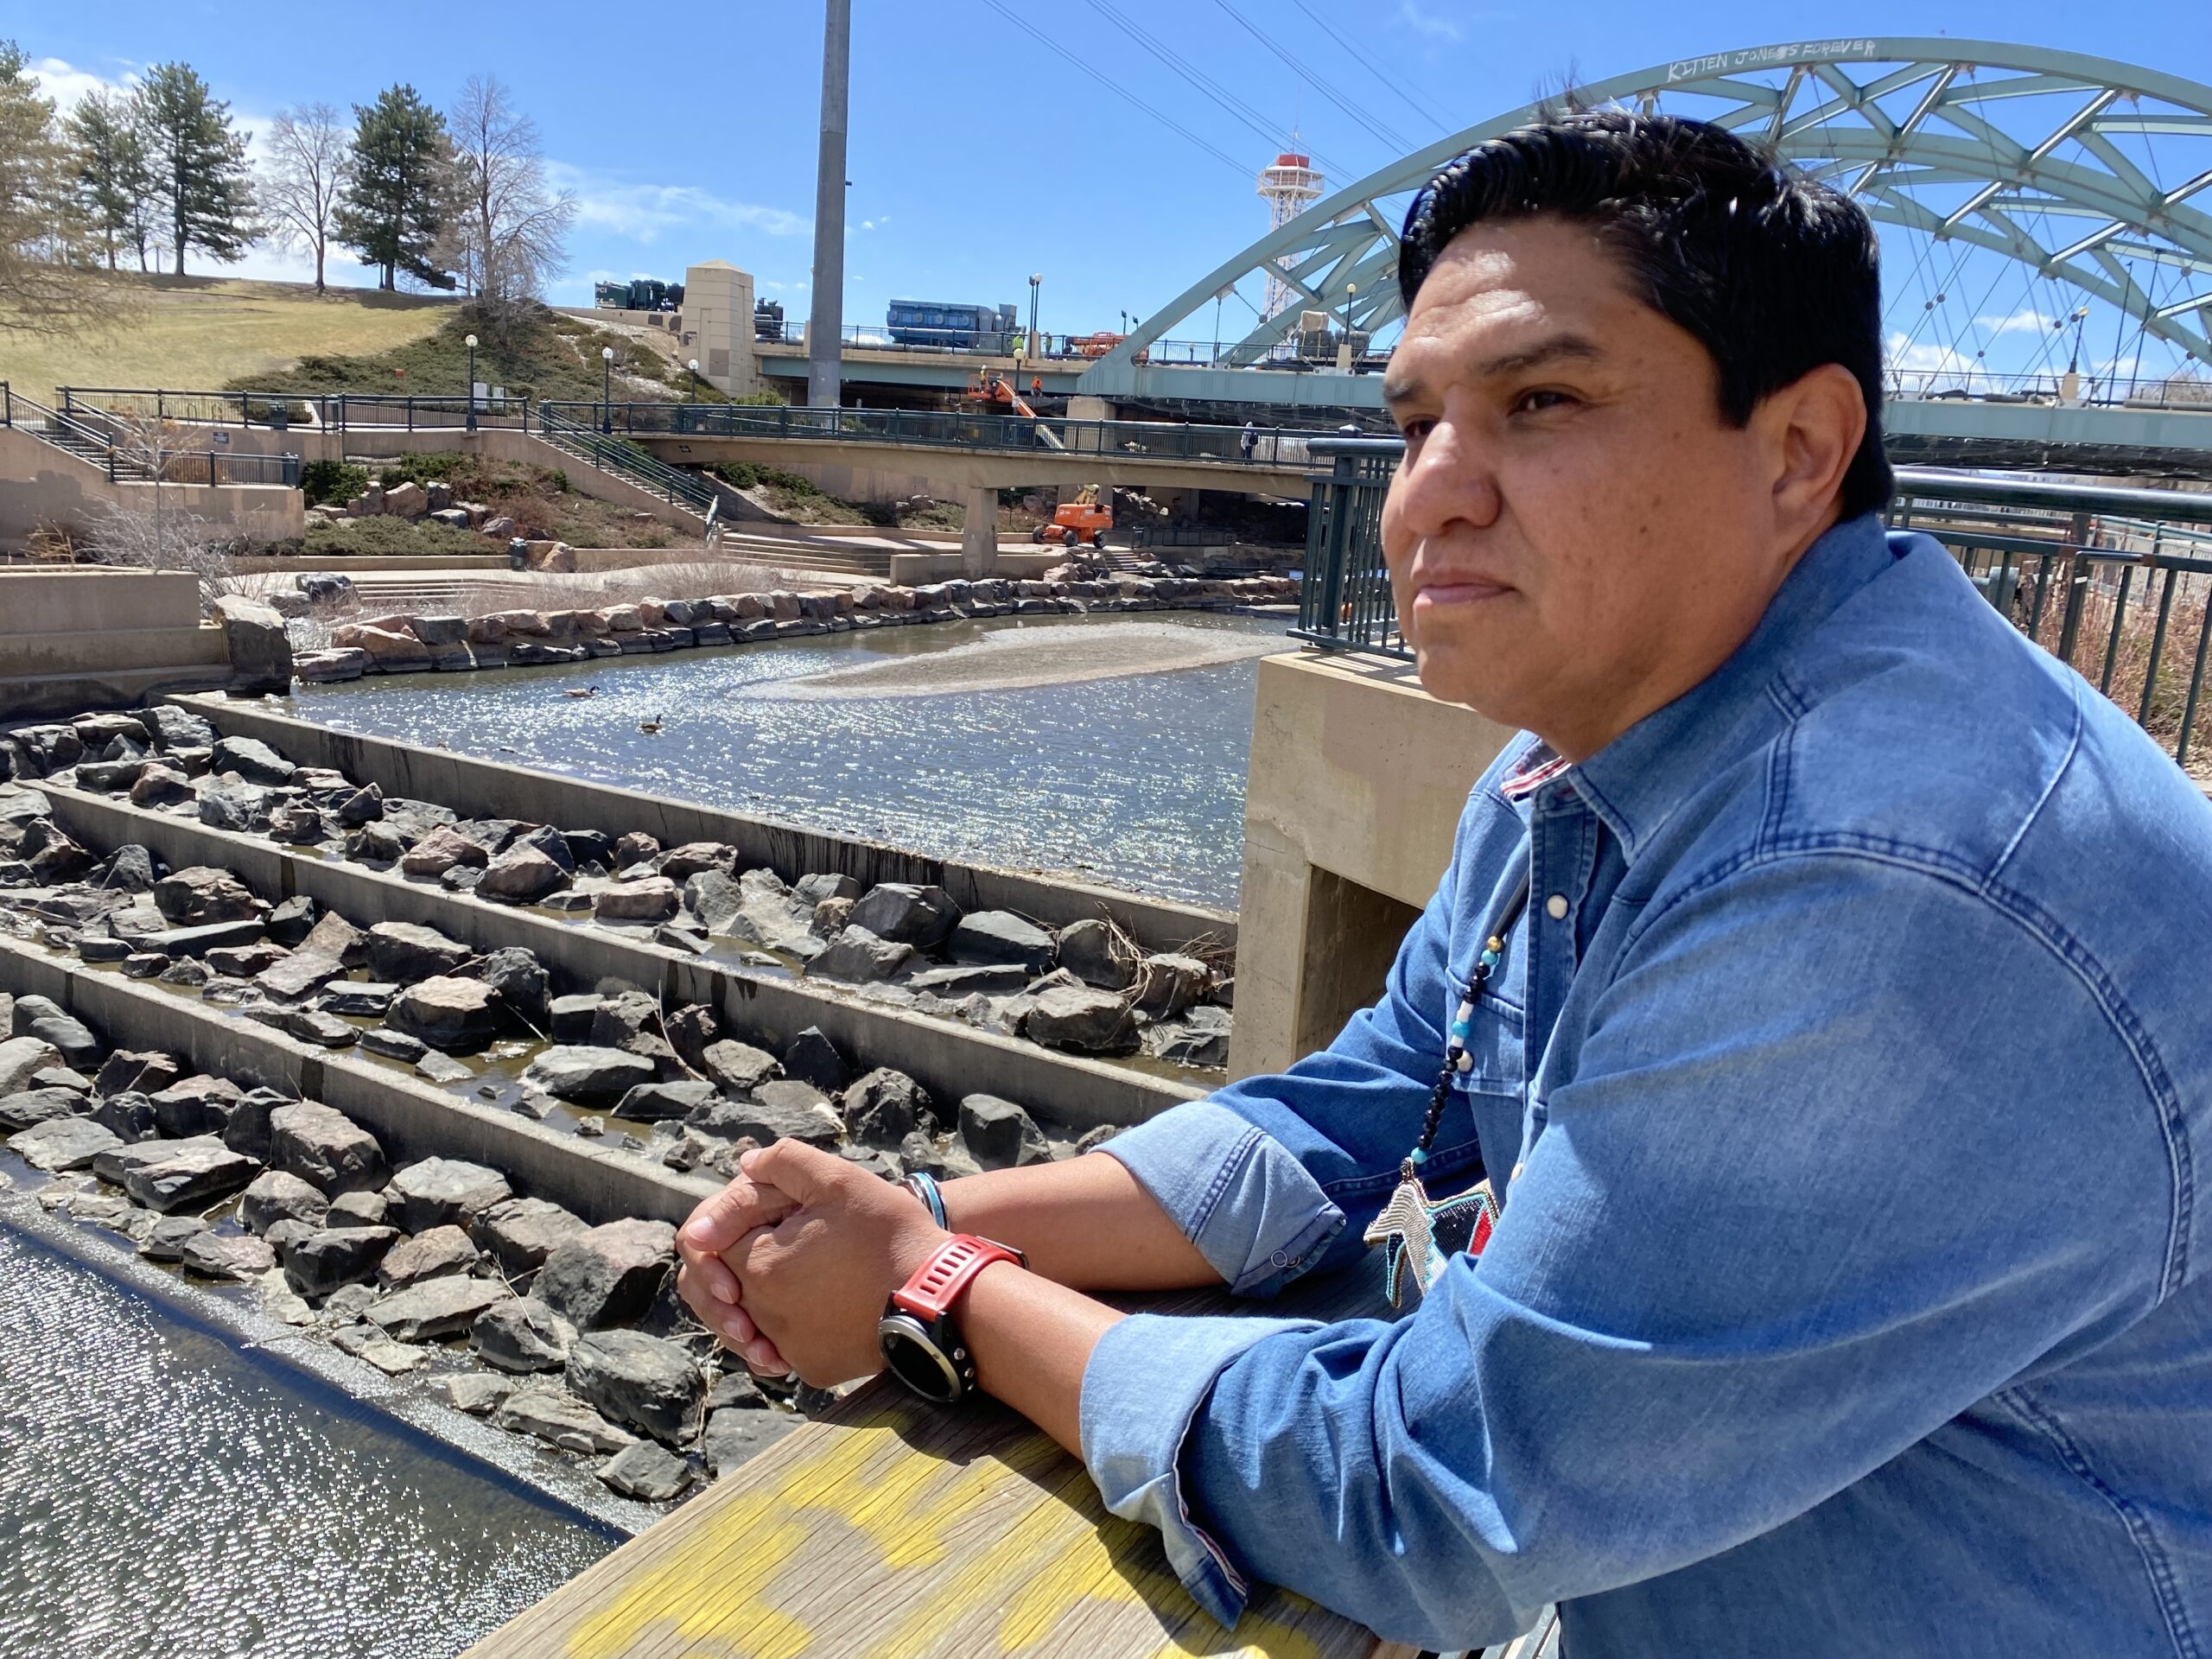 Ernest House Jr., a member of the Ute Mountain Ute Tribe and former executive director of the Colorado Commission Indian Affairs, at the confluence of the South Platte River and Cherry Creek in Denver.